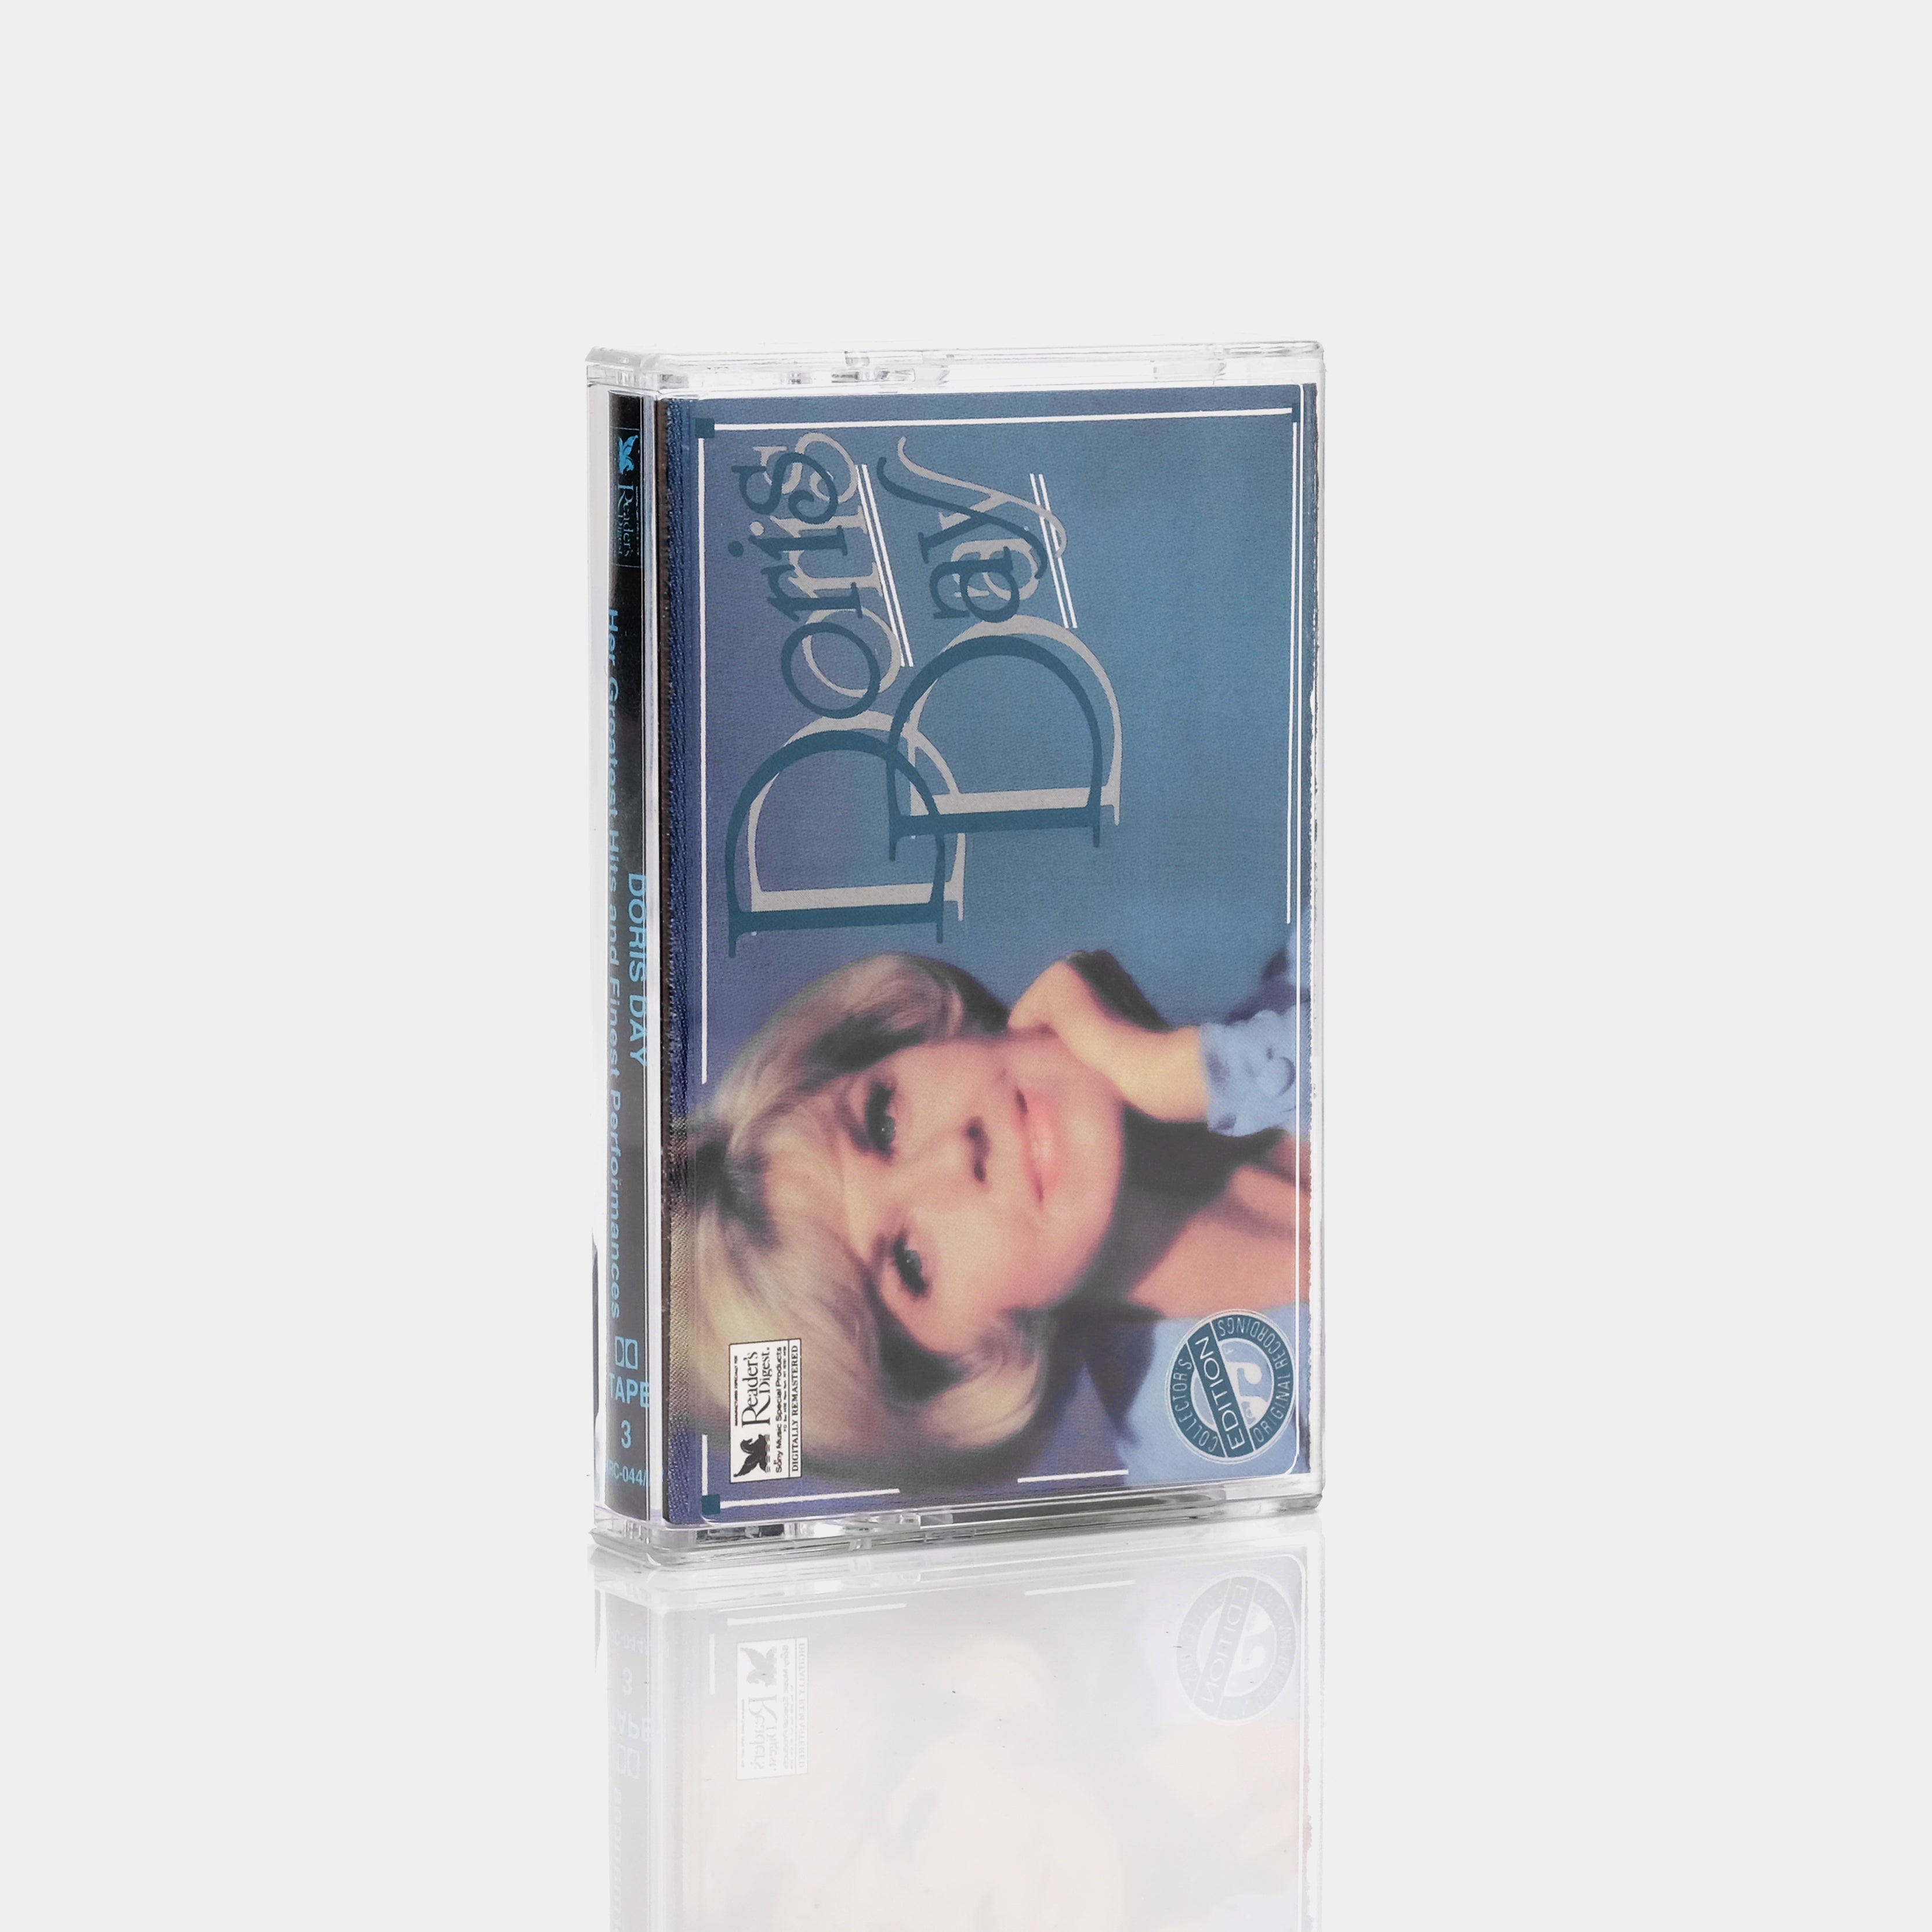 Doris Day - Her Greatest Hits and Finest Performances (Tape 3) Cassette Tape